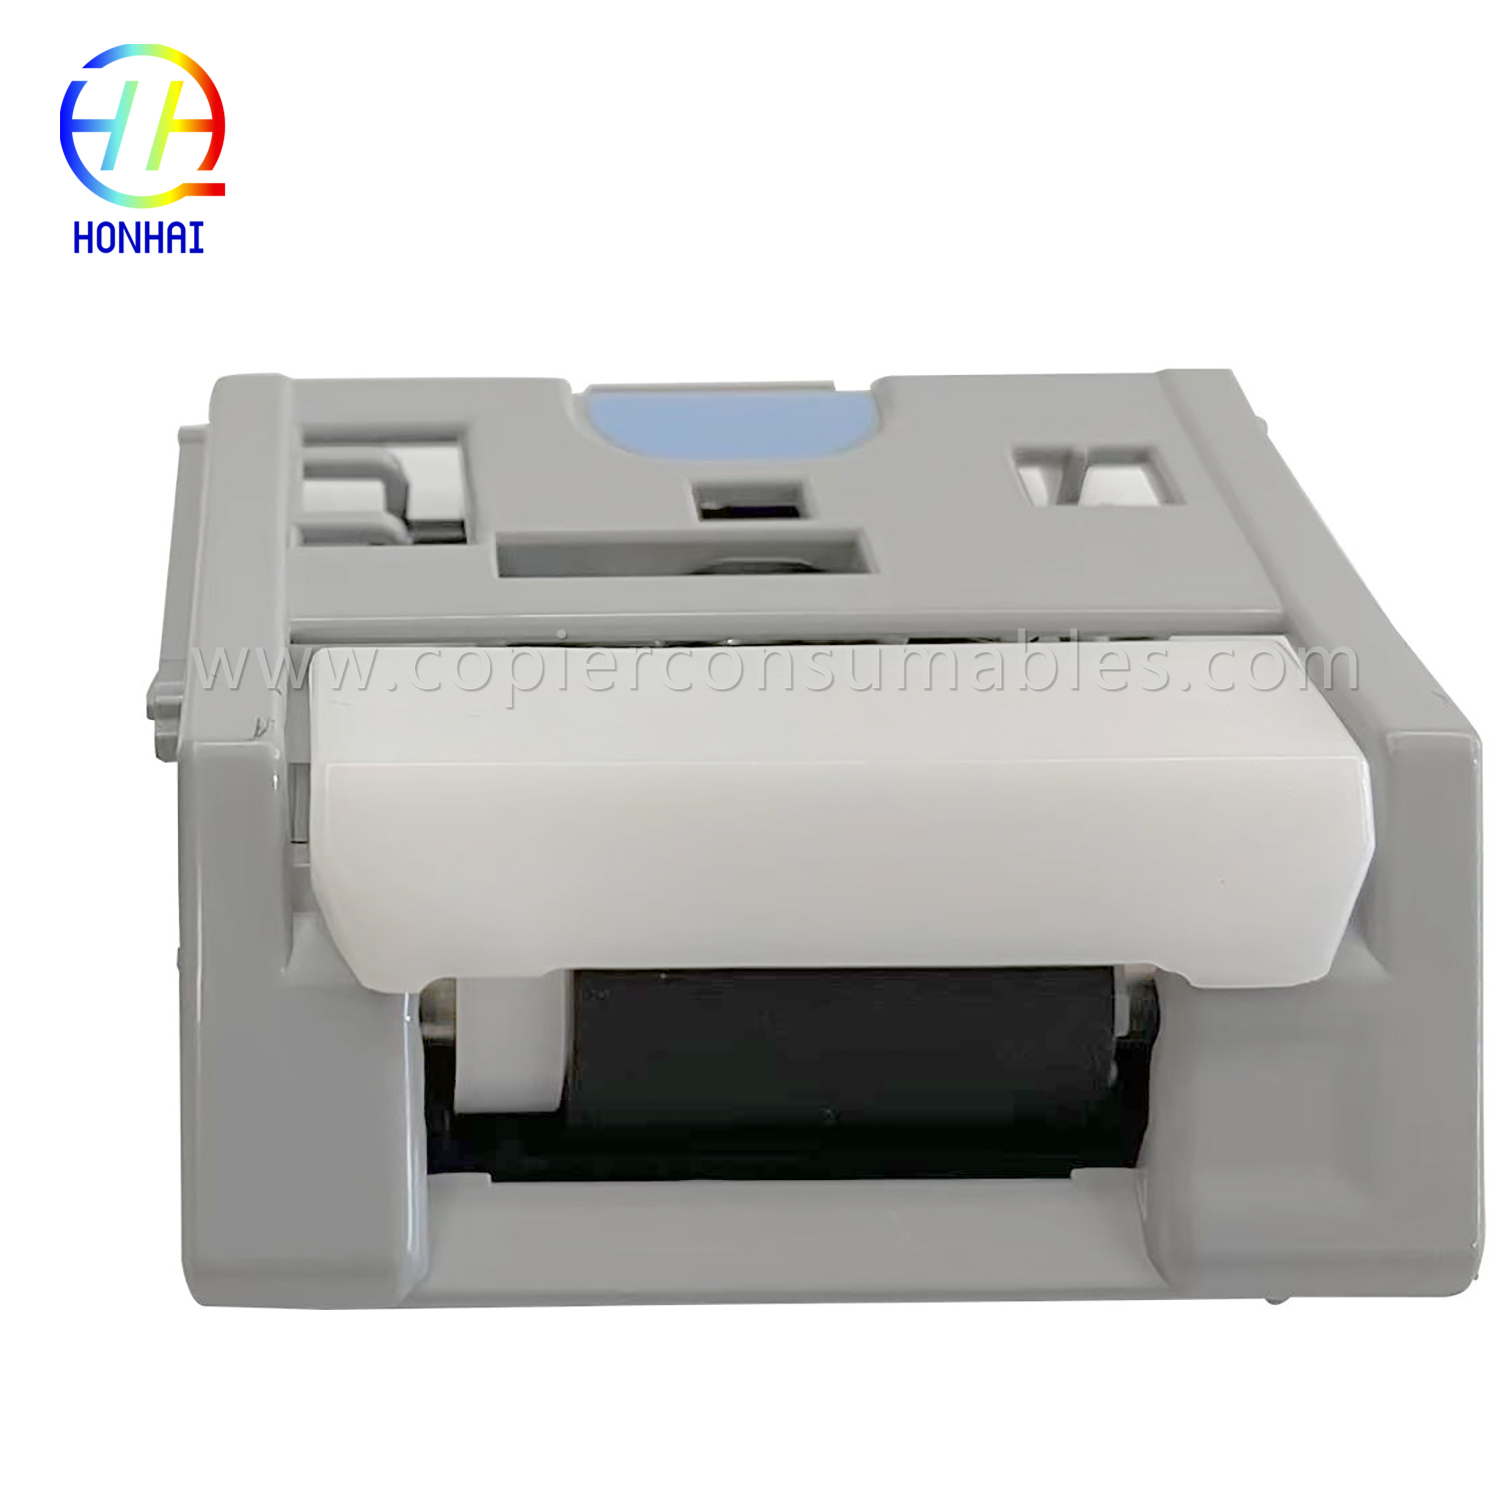 Tray 2-5 Separation Roller Assembly for HP M552 M553 M577 RM2-0064-000